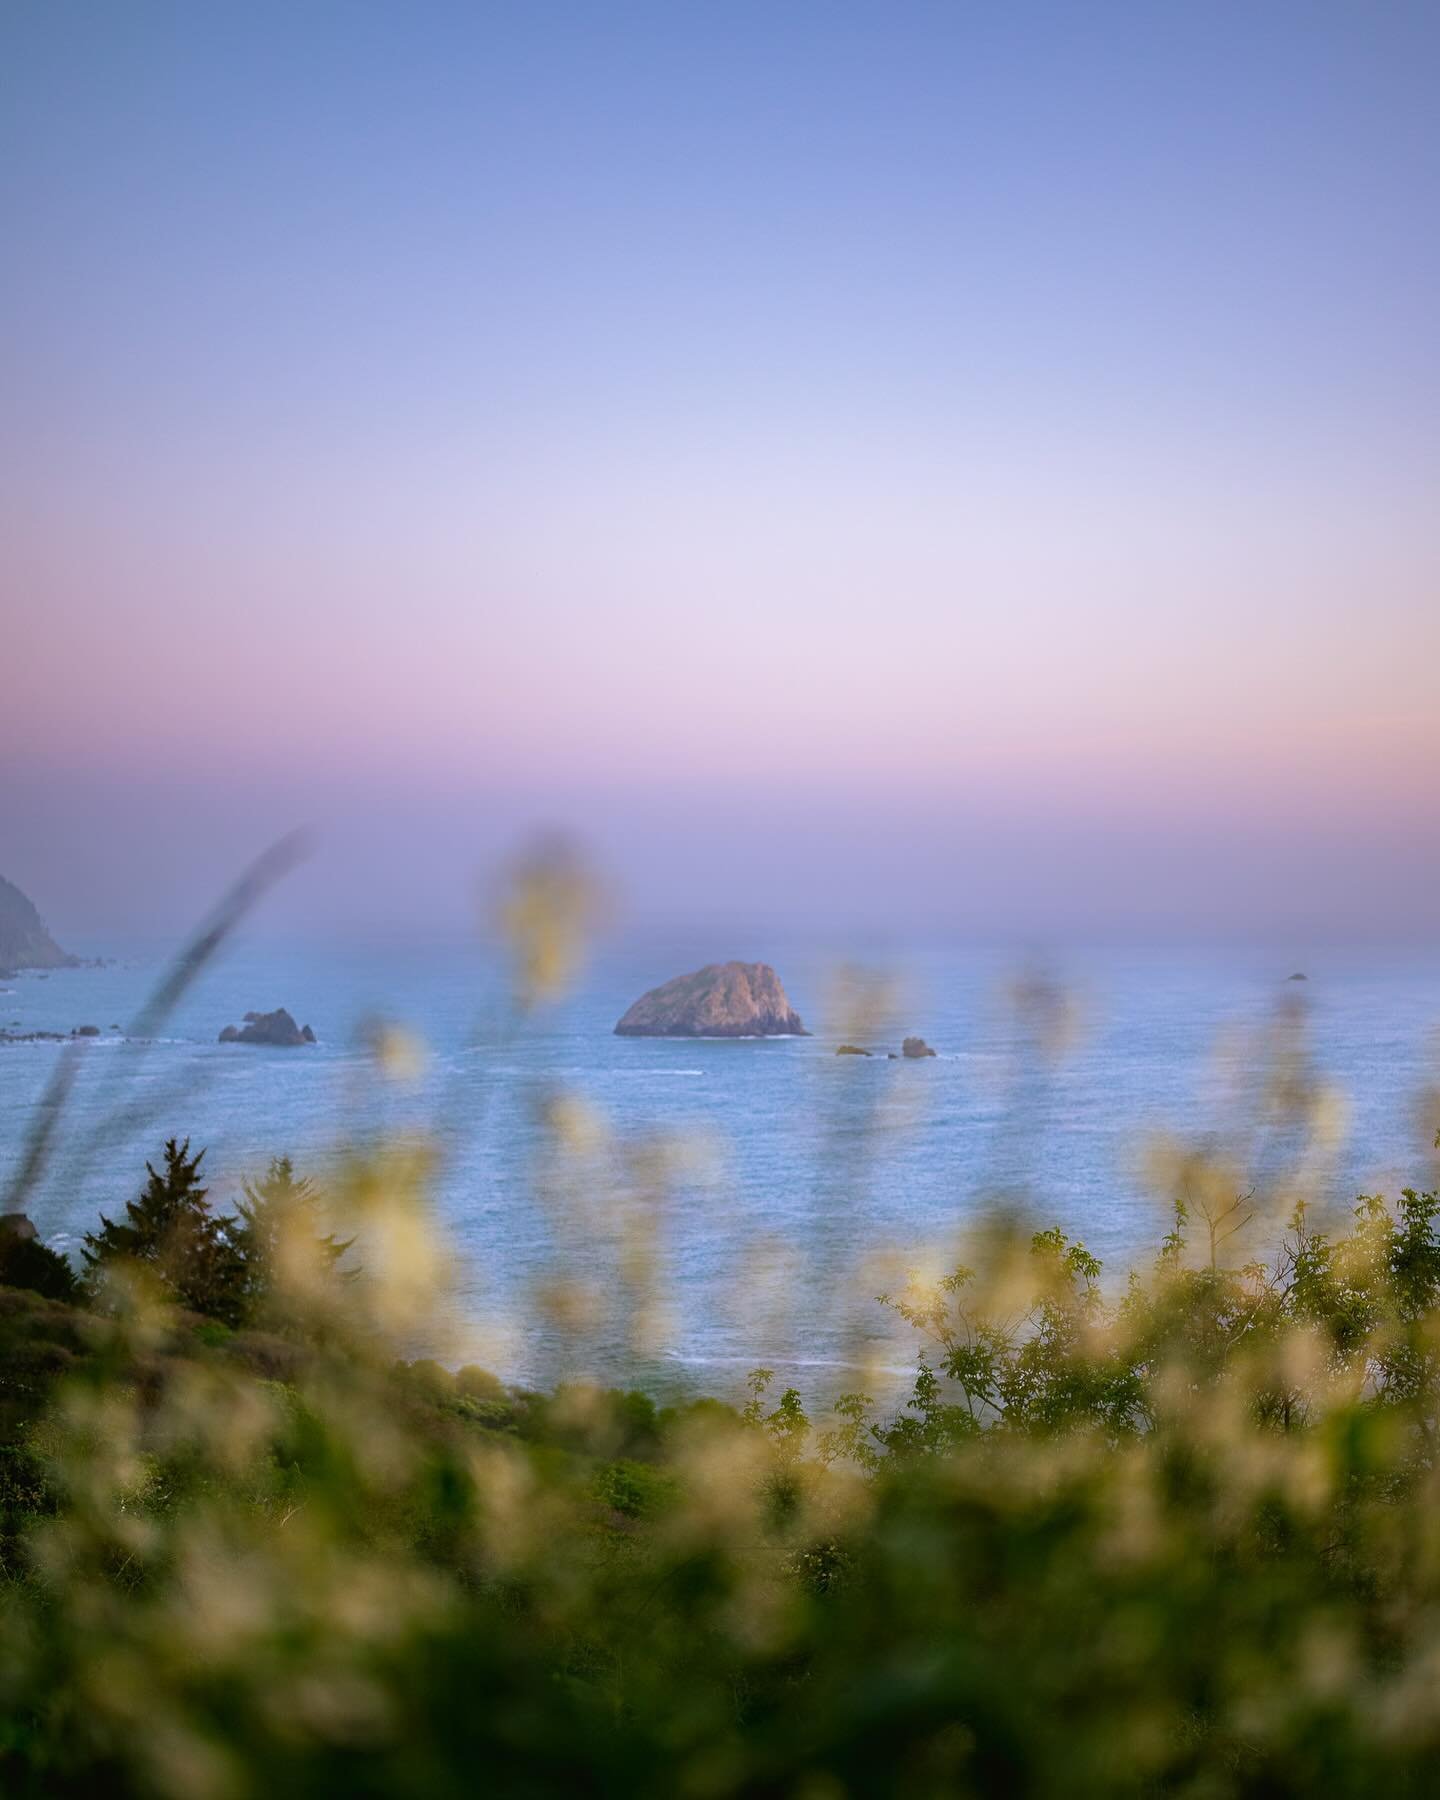 ahh, when in doubt, just escape to sunny days (&amp; evenings) by the coast 💓

#westcoast #exploremoor #nikon #oregon #california #pnw #sunset #nikoncreators #blackphotographers #redwoods #spring #wildflowerbloom